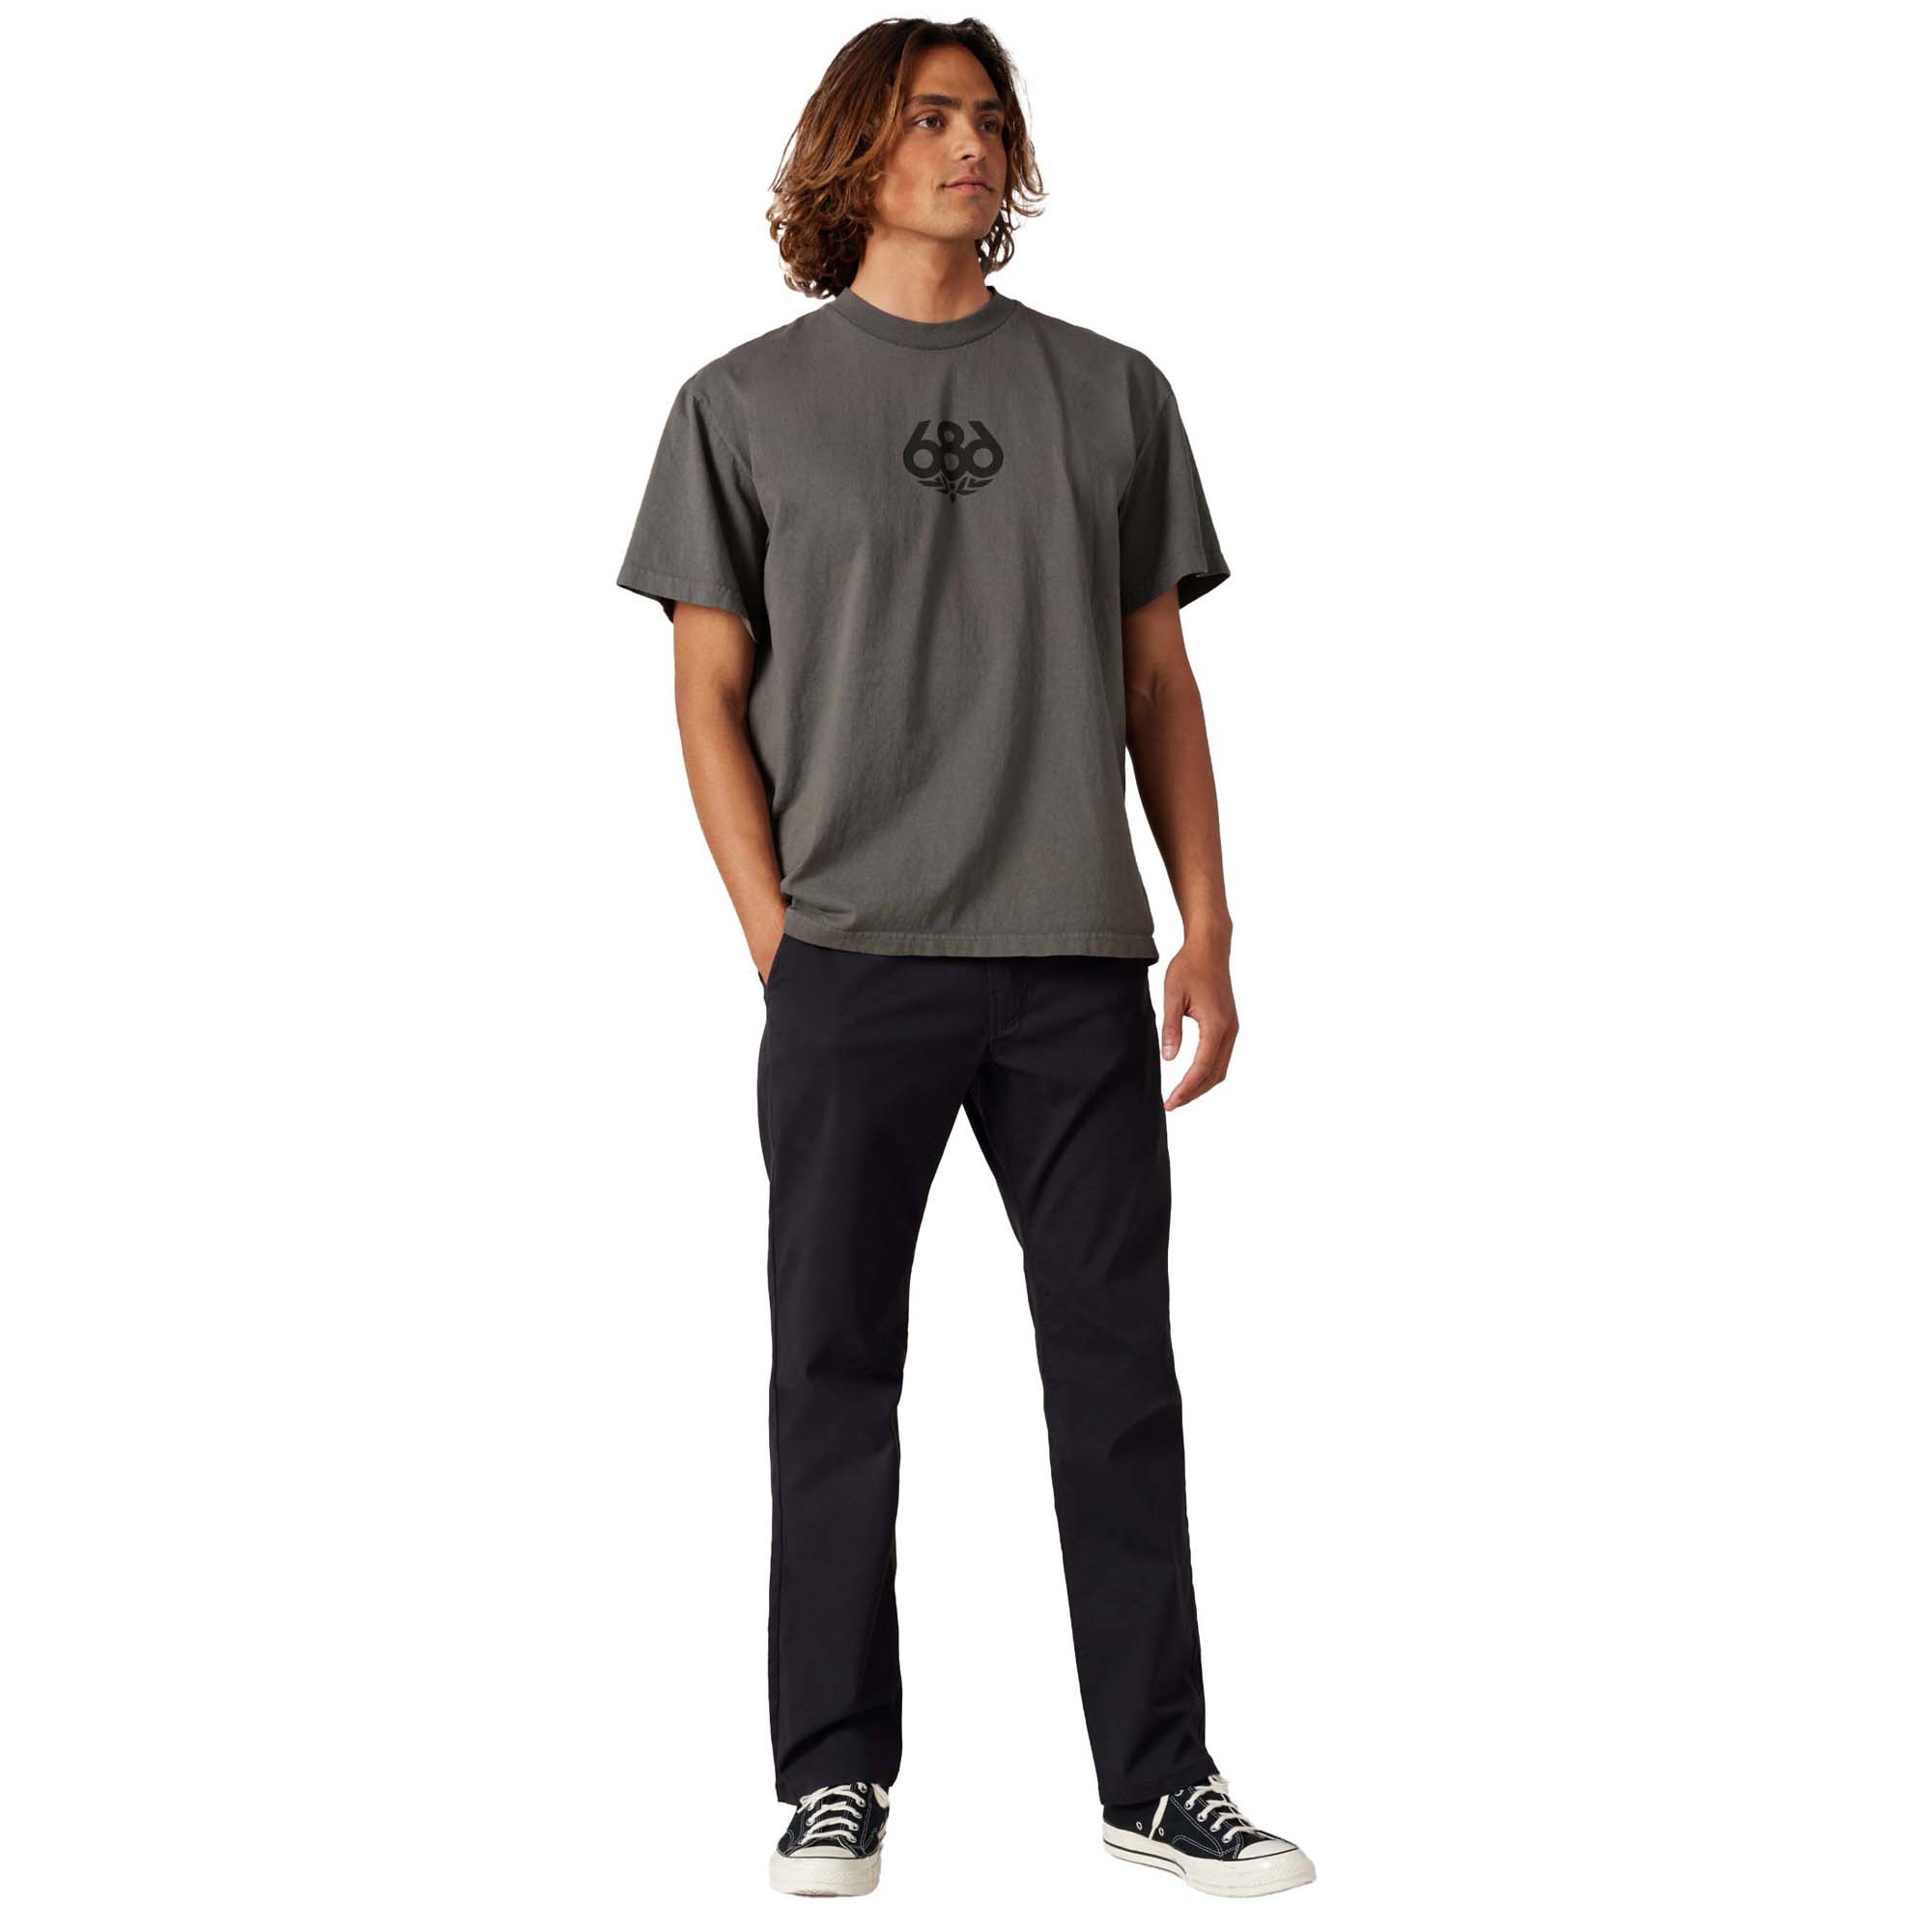 686 Everywhere Pant Relaxed FIt Hiking/Climbing Trousers